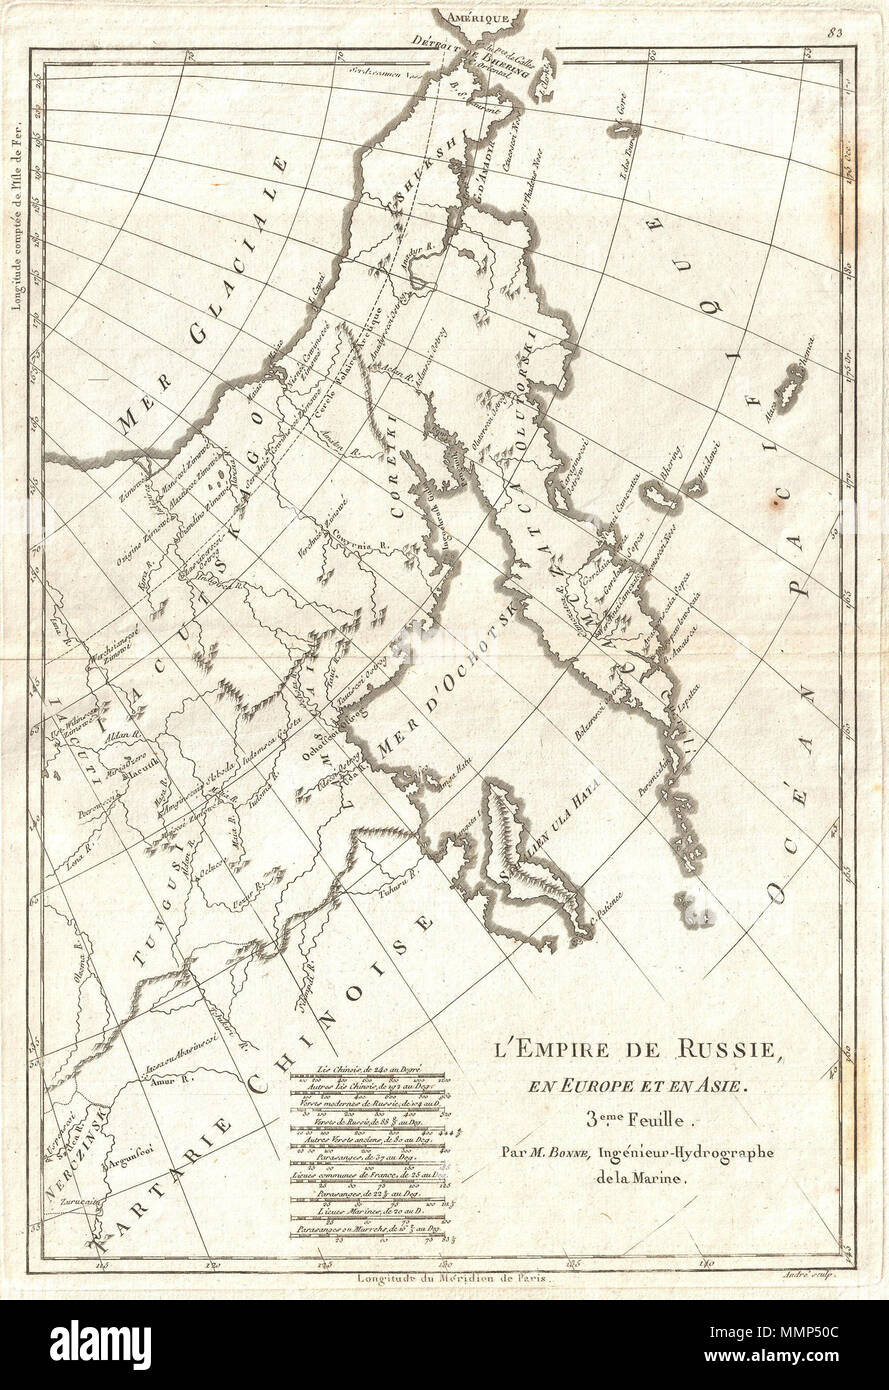 .  English: An attractive example of R. Bonne’s c. 1780 map of Eastern Russia, Tartary, and Siberia. Covers from Nerczinsk and Chinese Tartary north to the Arctic and eastward as far as Alaska. Focuses on Siberia showing various villages, fortifications, trading stations, and rivers. The explorations of Vitus Bering are evident. Drawn by Bonne for an unknown publication, but seems to be the third map in a series covering all of Russia.  L'Emire deRussie, en Europe et en Asie. 3eme Fuille.. 1780 (undated). 1780 Bellin Map of Eastern Russia, Tartary, and the Bering Strait - Geographicus - Empire Stock Photo